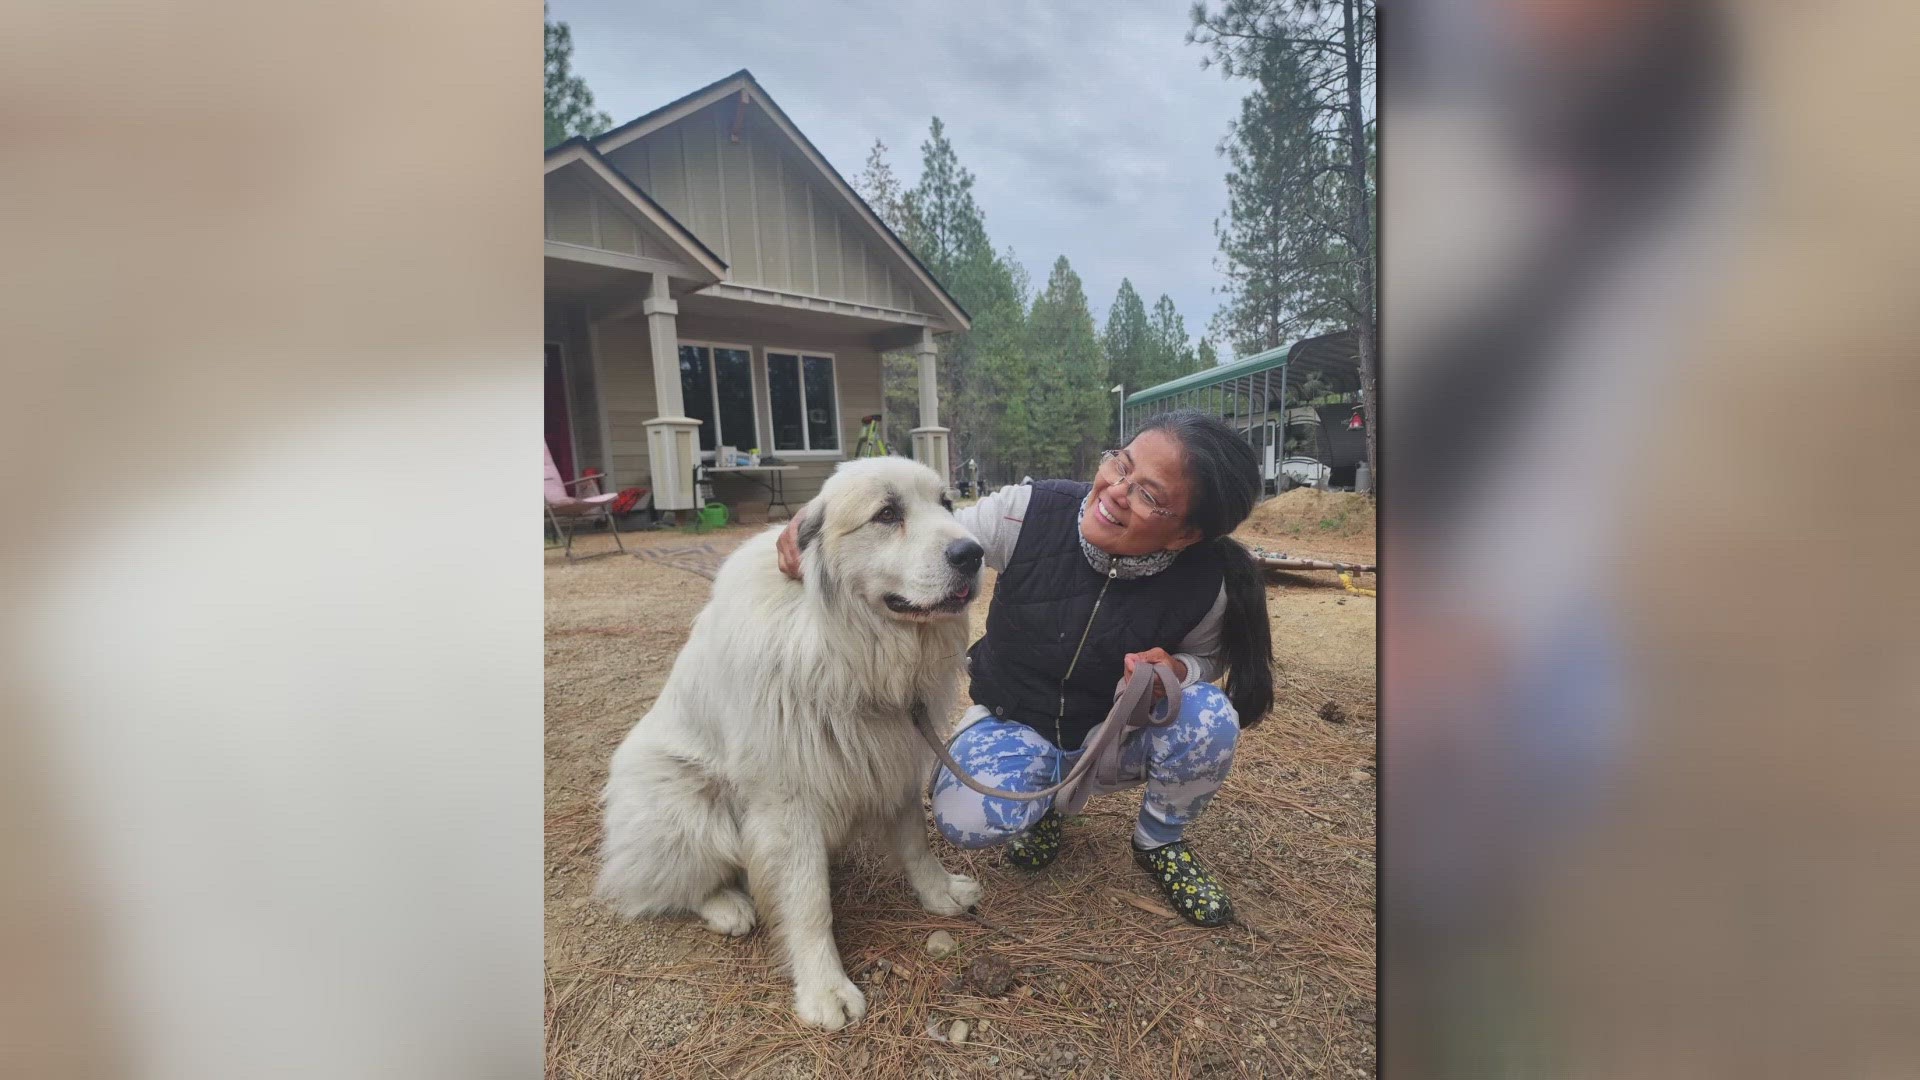 Ezra was separated from his family when they had to evacuate from their home due to the devastating wildfire in Elk, Wash.